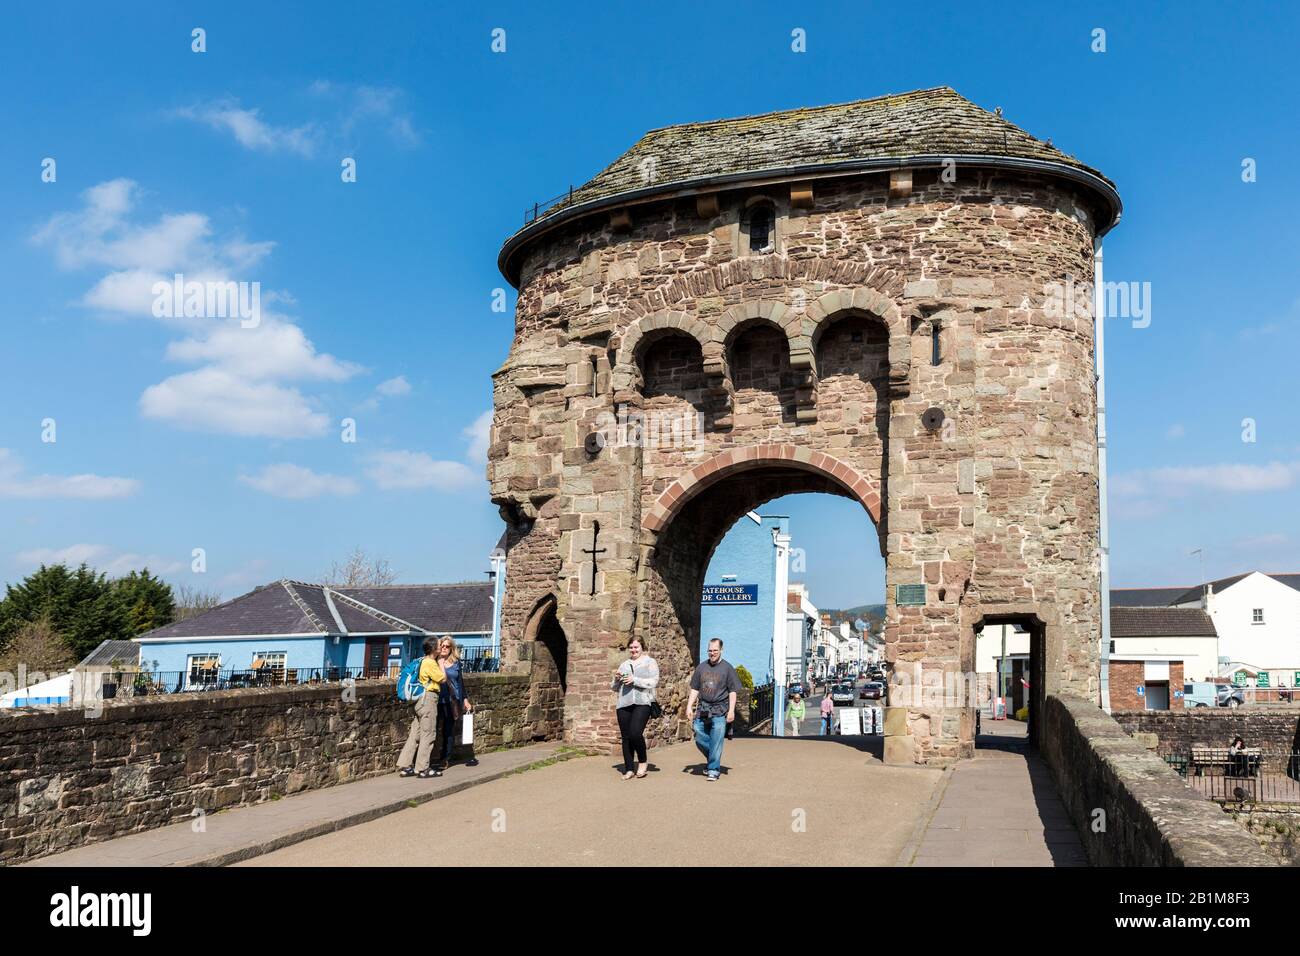 Fortified gateway on the bridge over the river Monnow, Monmouth, Wales, UK Stock Photo